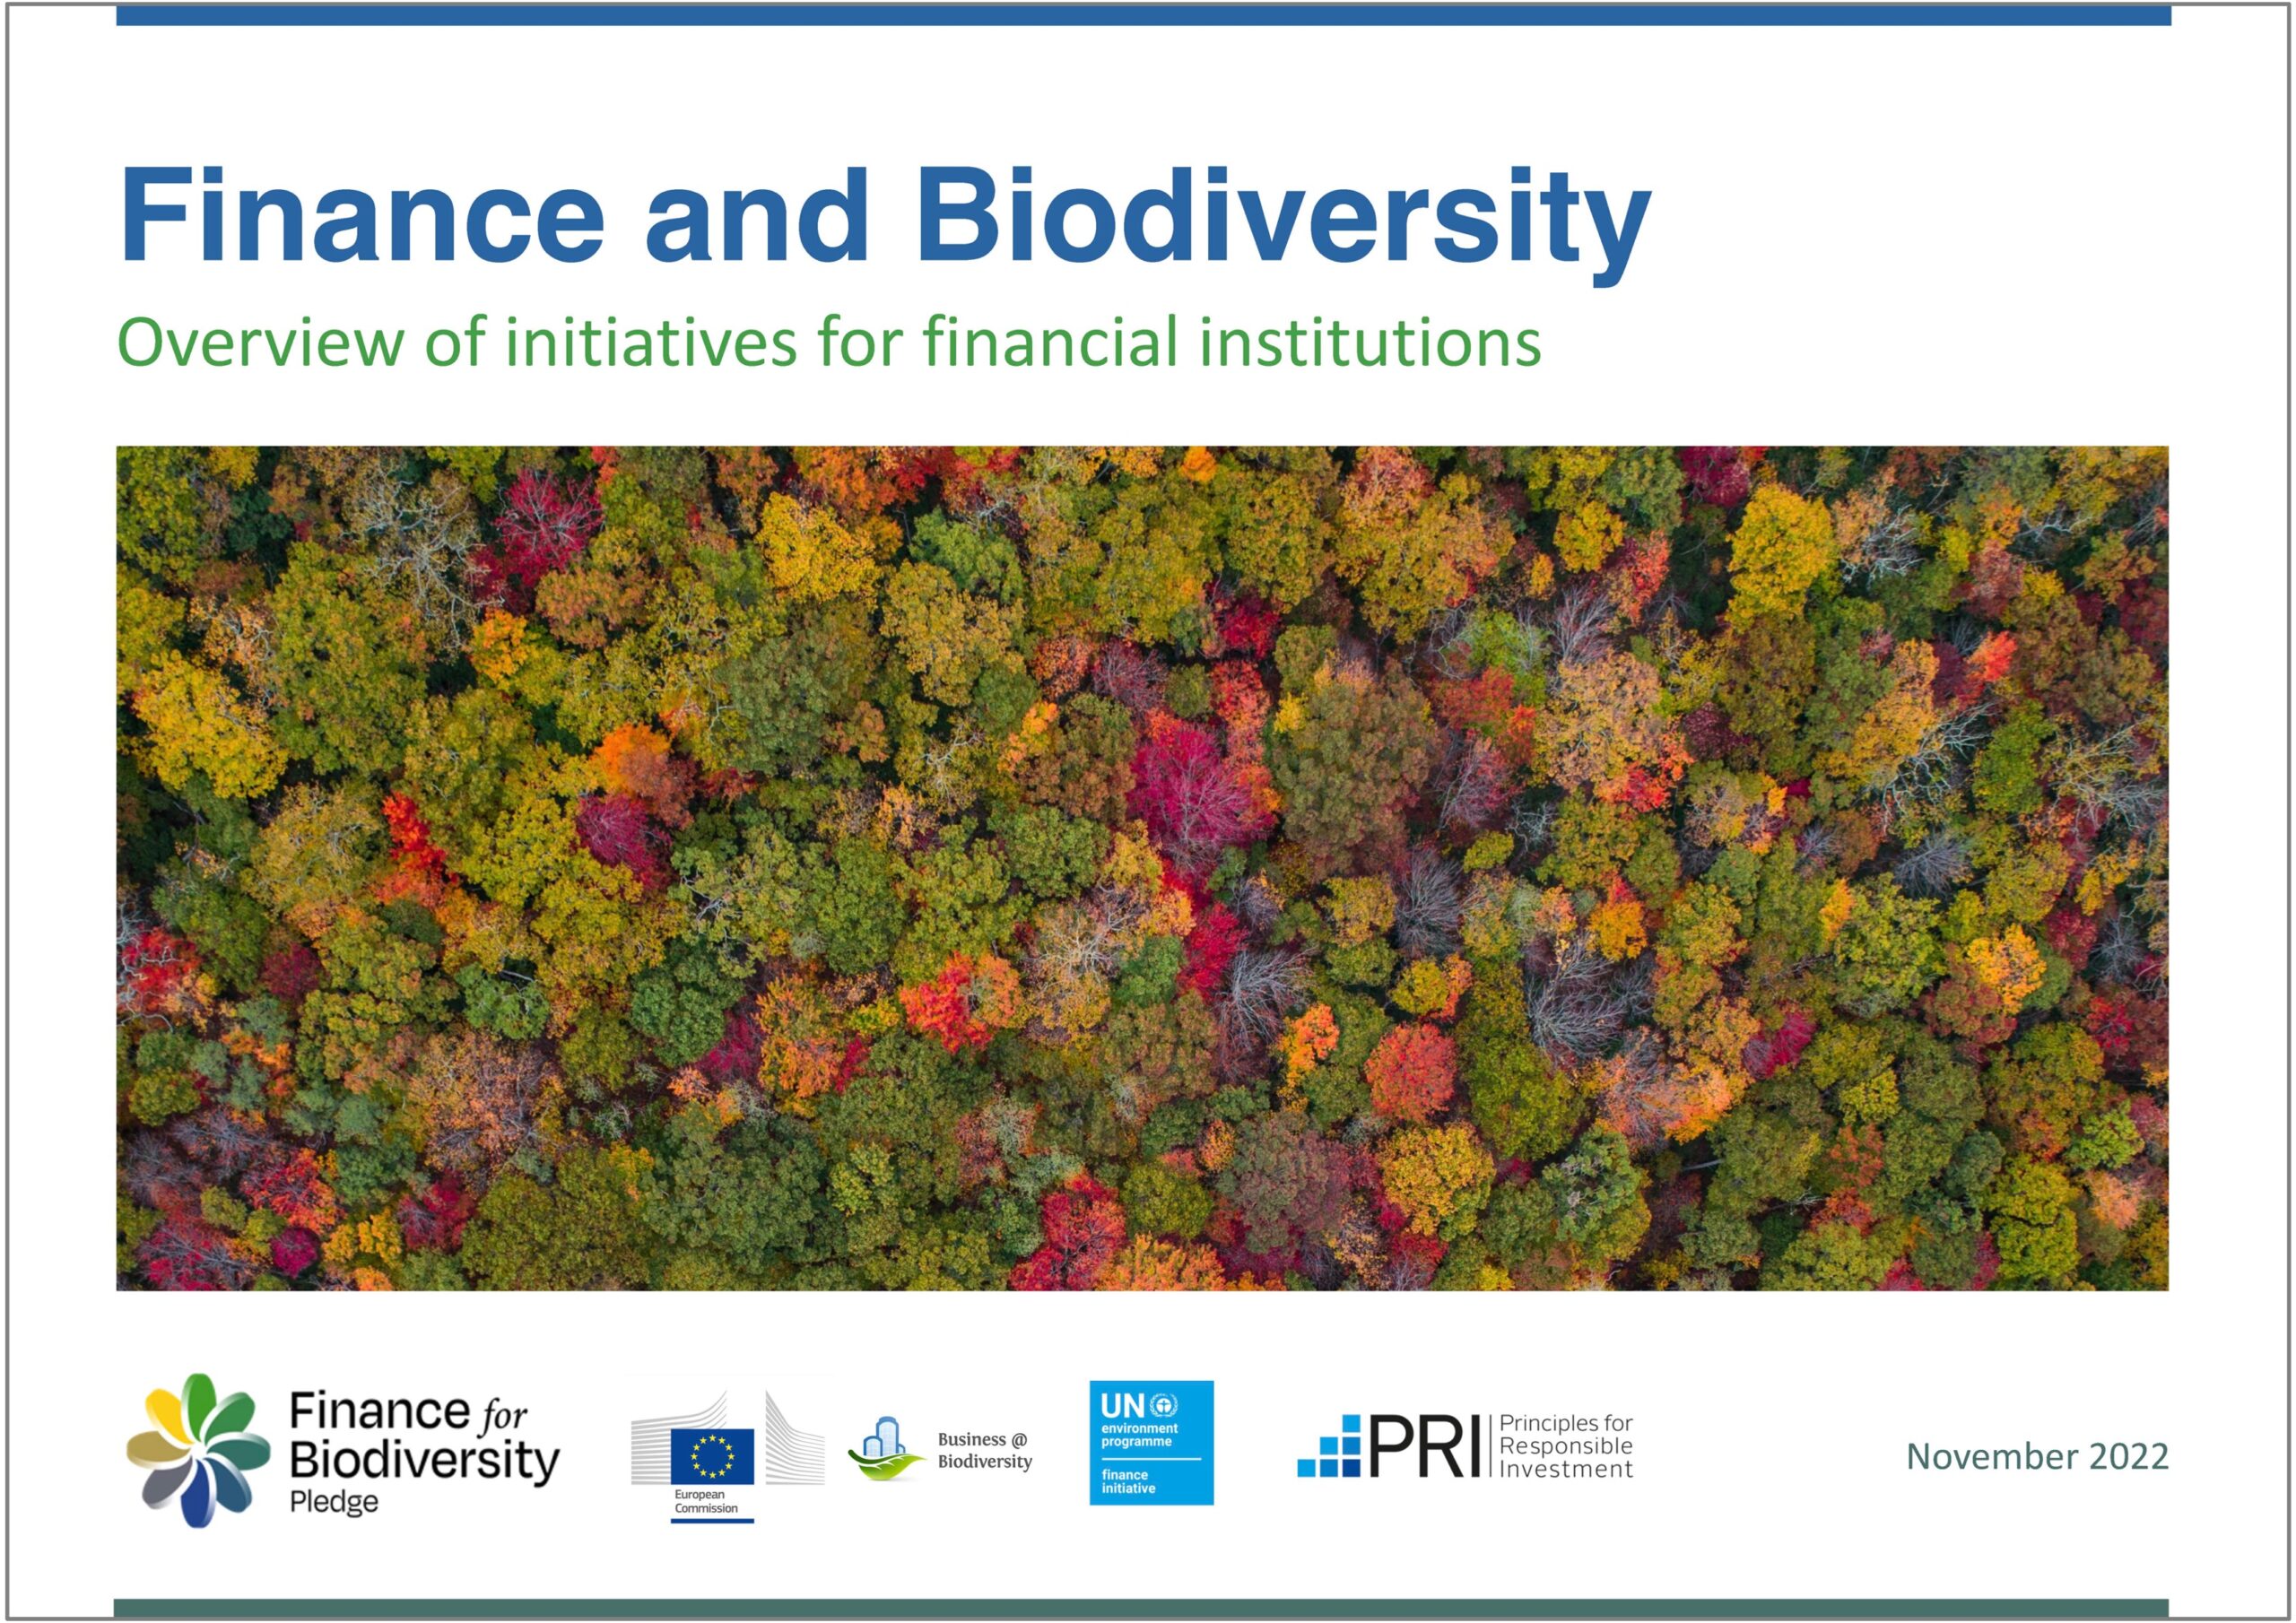 Cover-Finance_and_Biodiversity_Overview_of_Initiatives_November2022